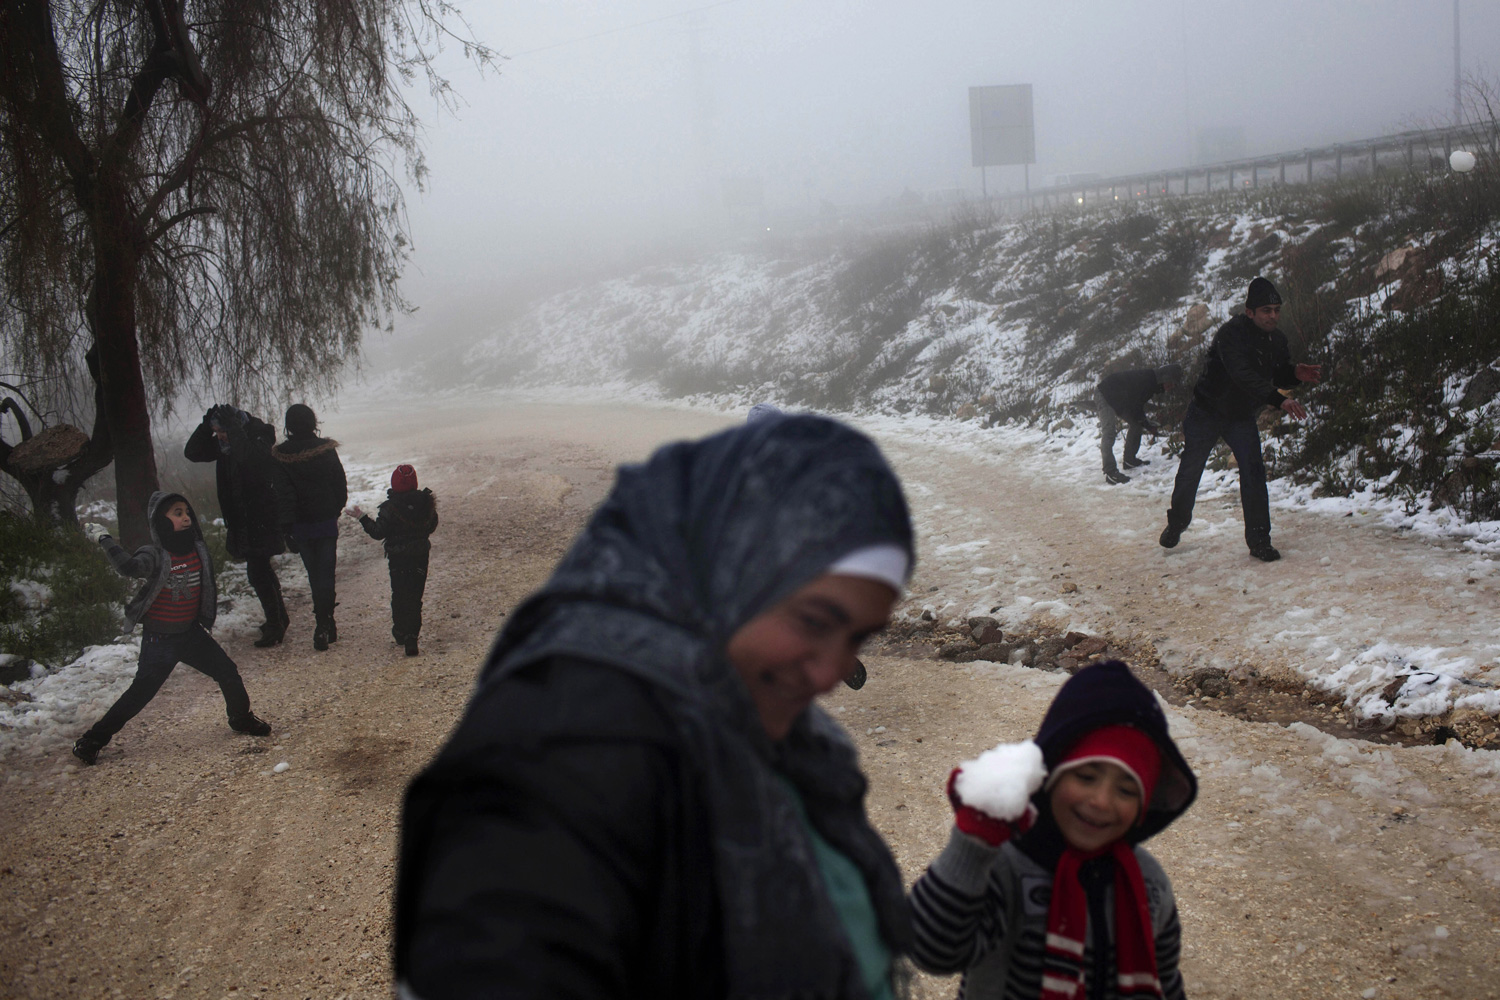 March 2, 2012. Palestinians play with snow near the West Bank town of Bethlehem.